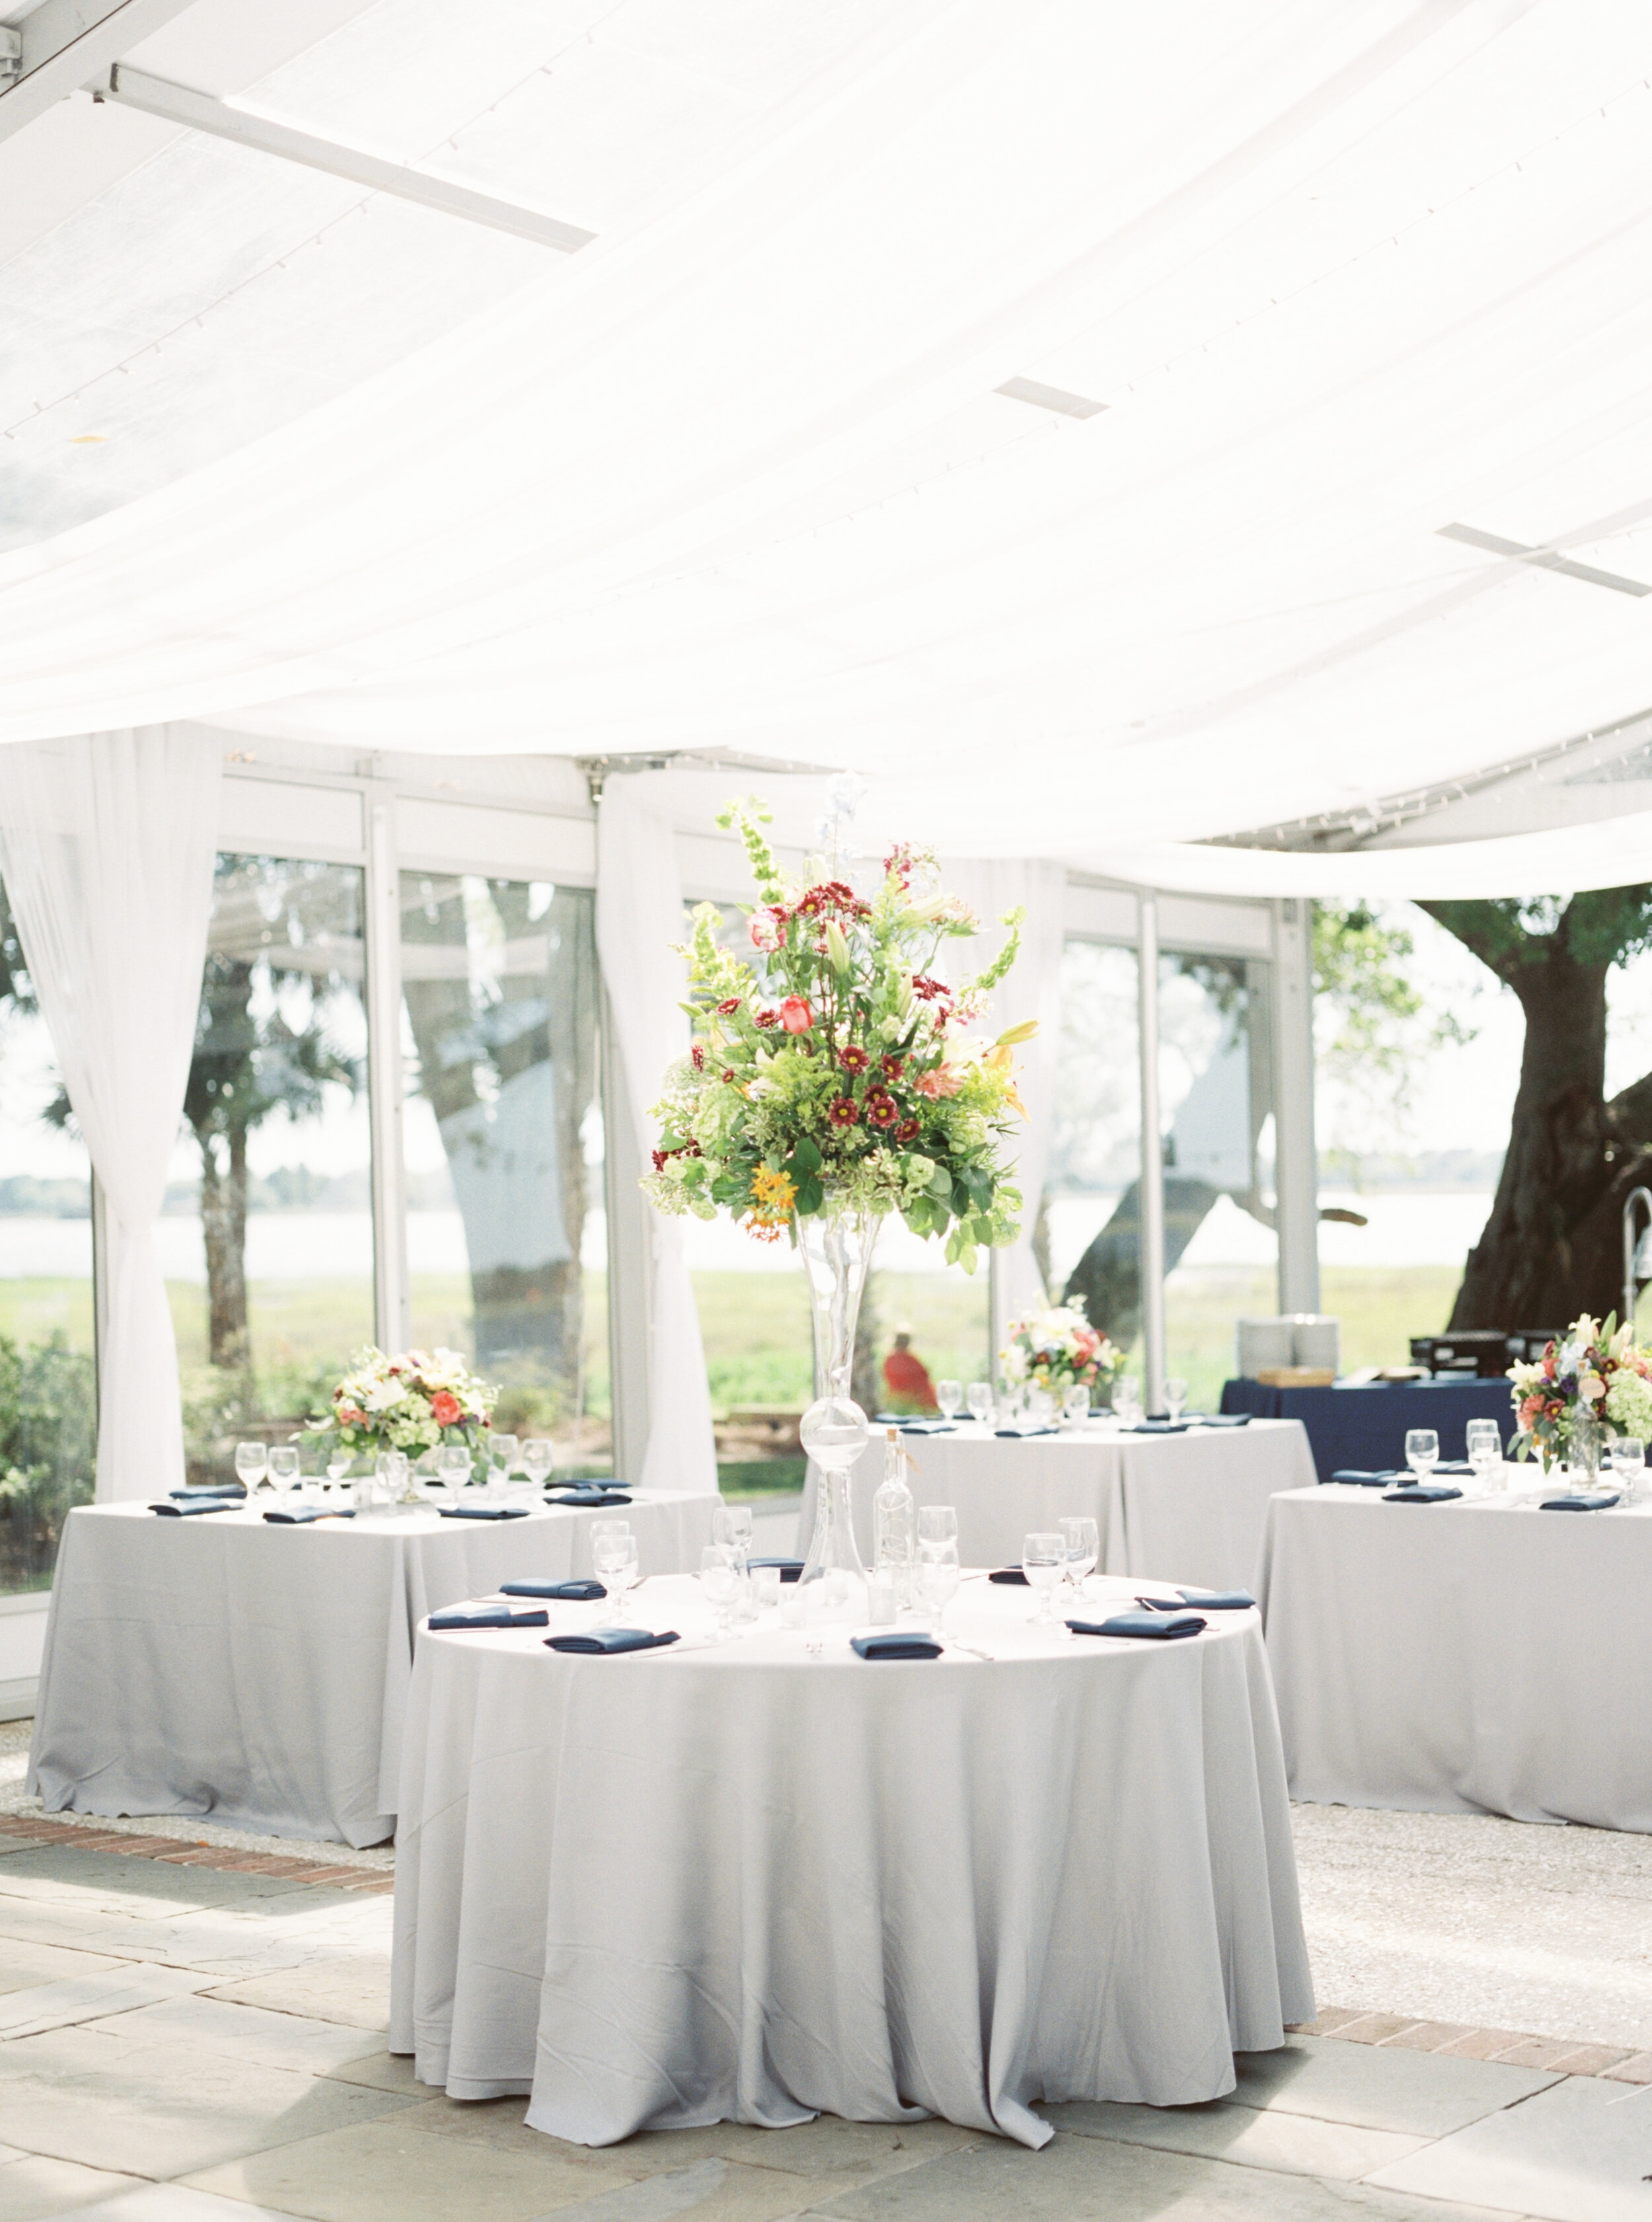 Tent with table setting and centerpiece - Lowdnes Grove - Ava Moore - Tyler & Rachel Ford.jpg